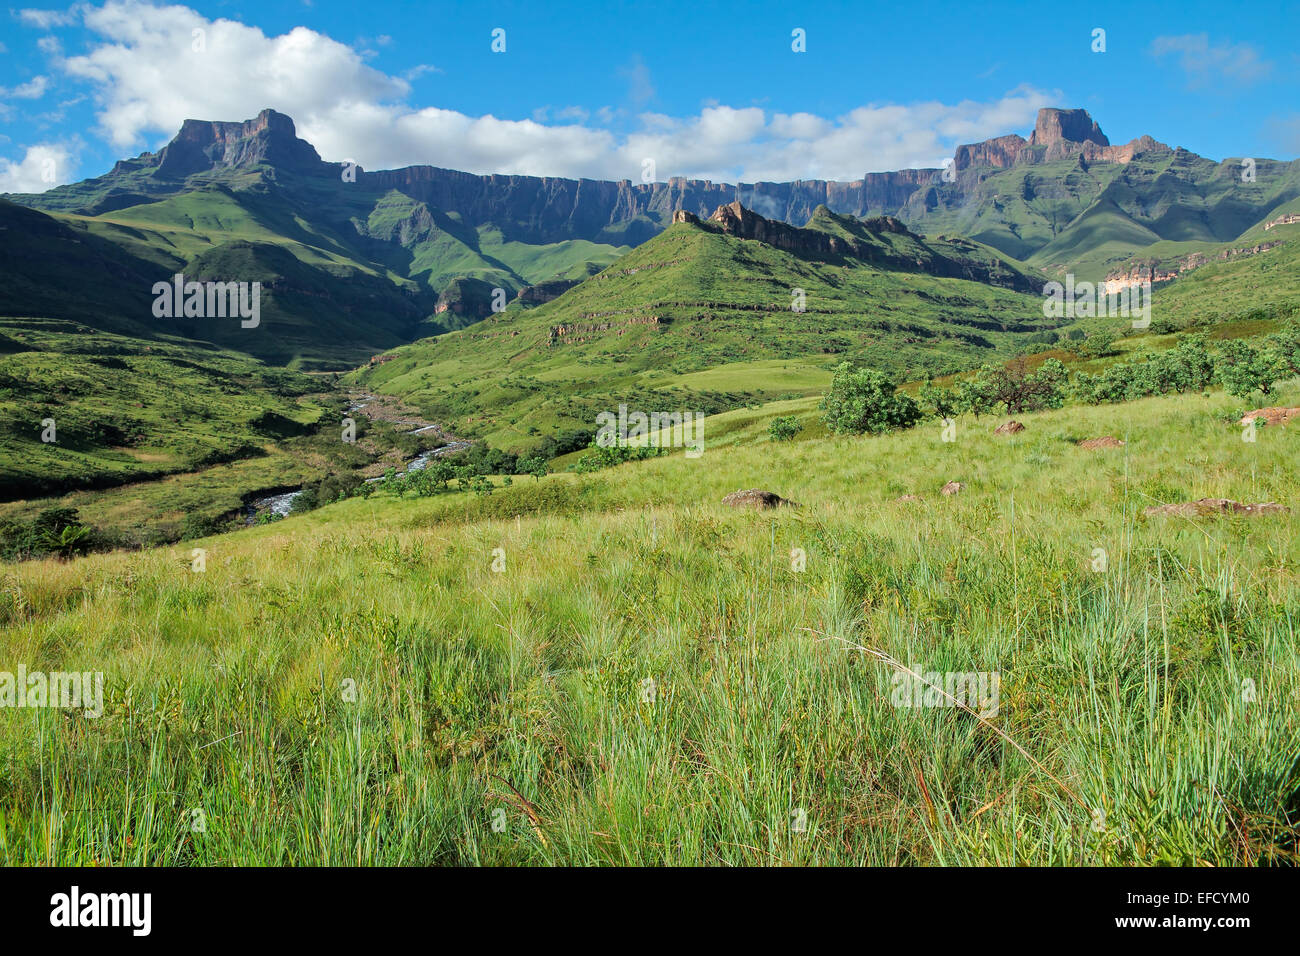 Amphitheater and Tugela river, Drakensberg mountains, Royal Natal National Park, South Africa Stock Photo